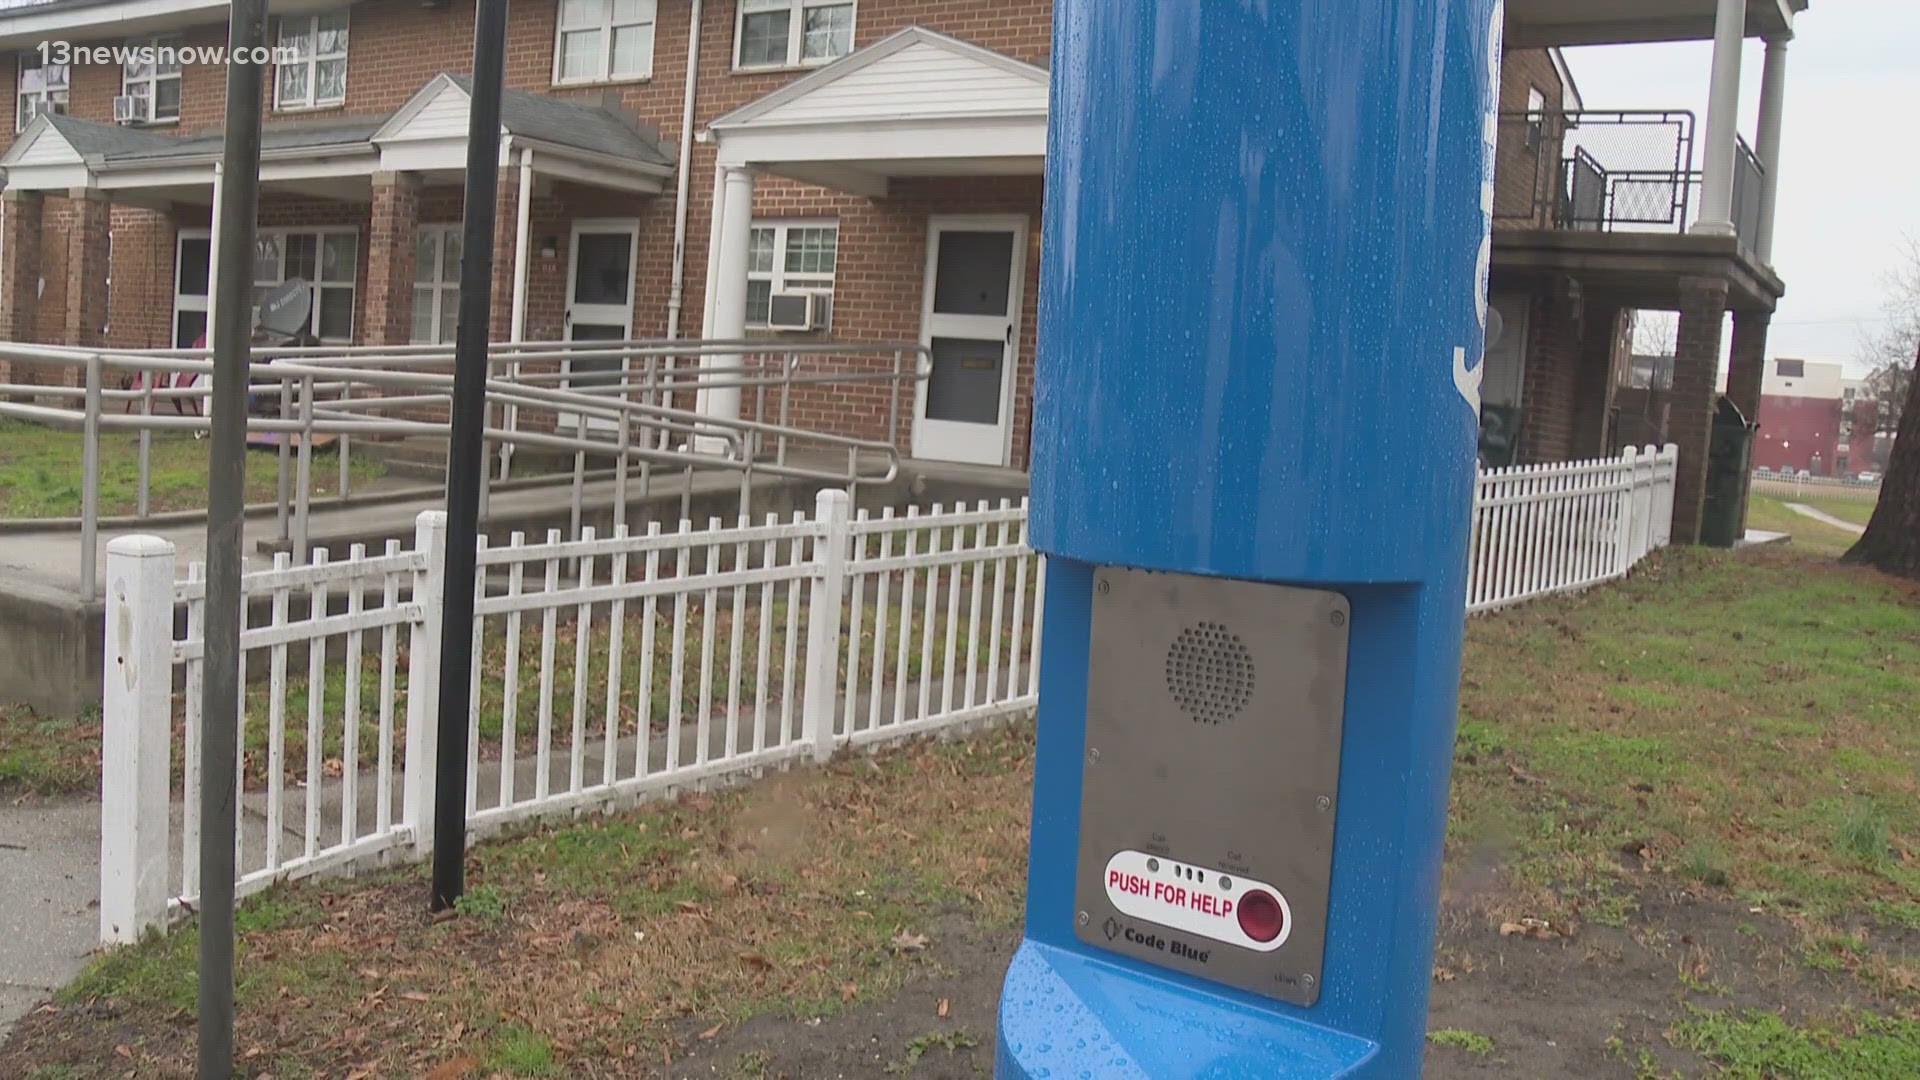 Leaders with the local housing authority said they will monitor the effectiveness and call volume of the new emergency callbox on Bagnall Road.